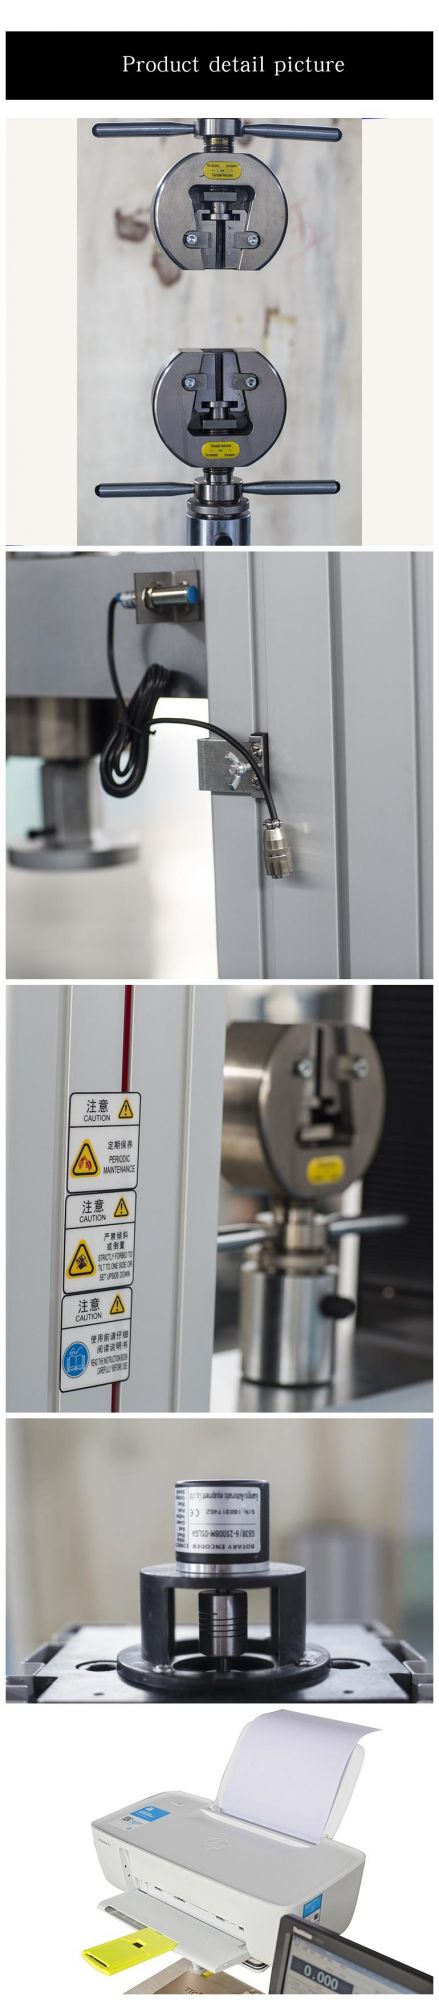 Wdw Series Electronic Tensile Universal Testing Machine for Compression and Tensile Measuring Device Used in Laboratory